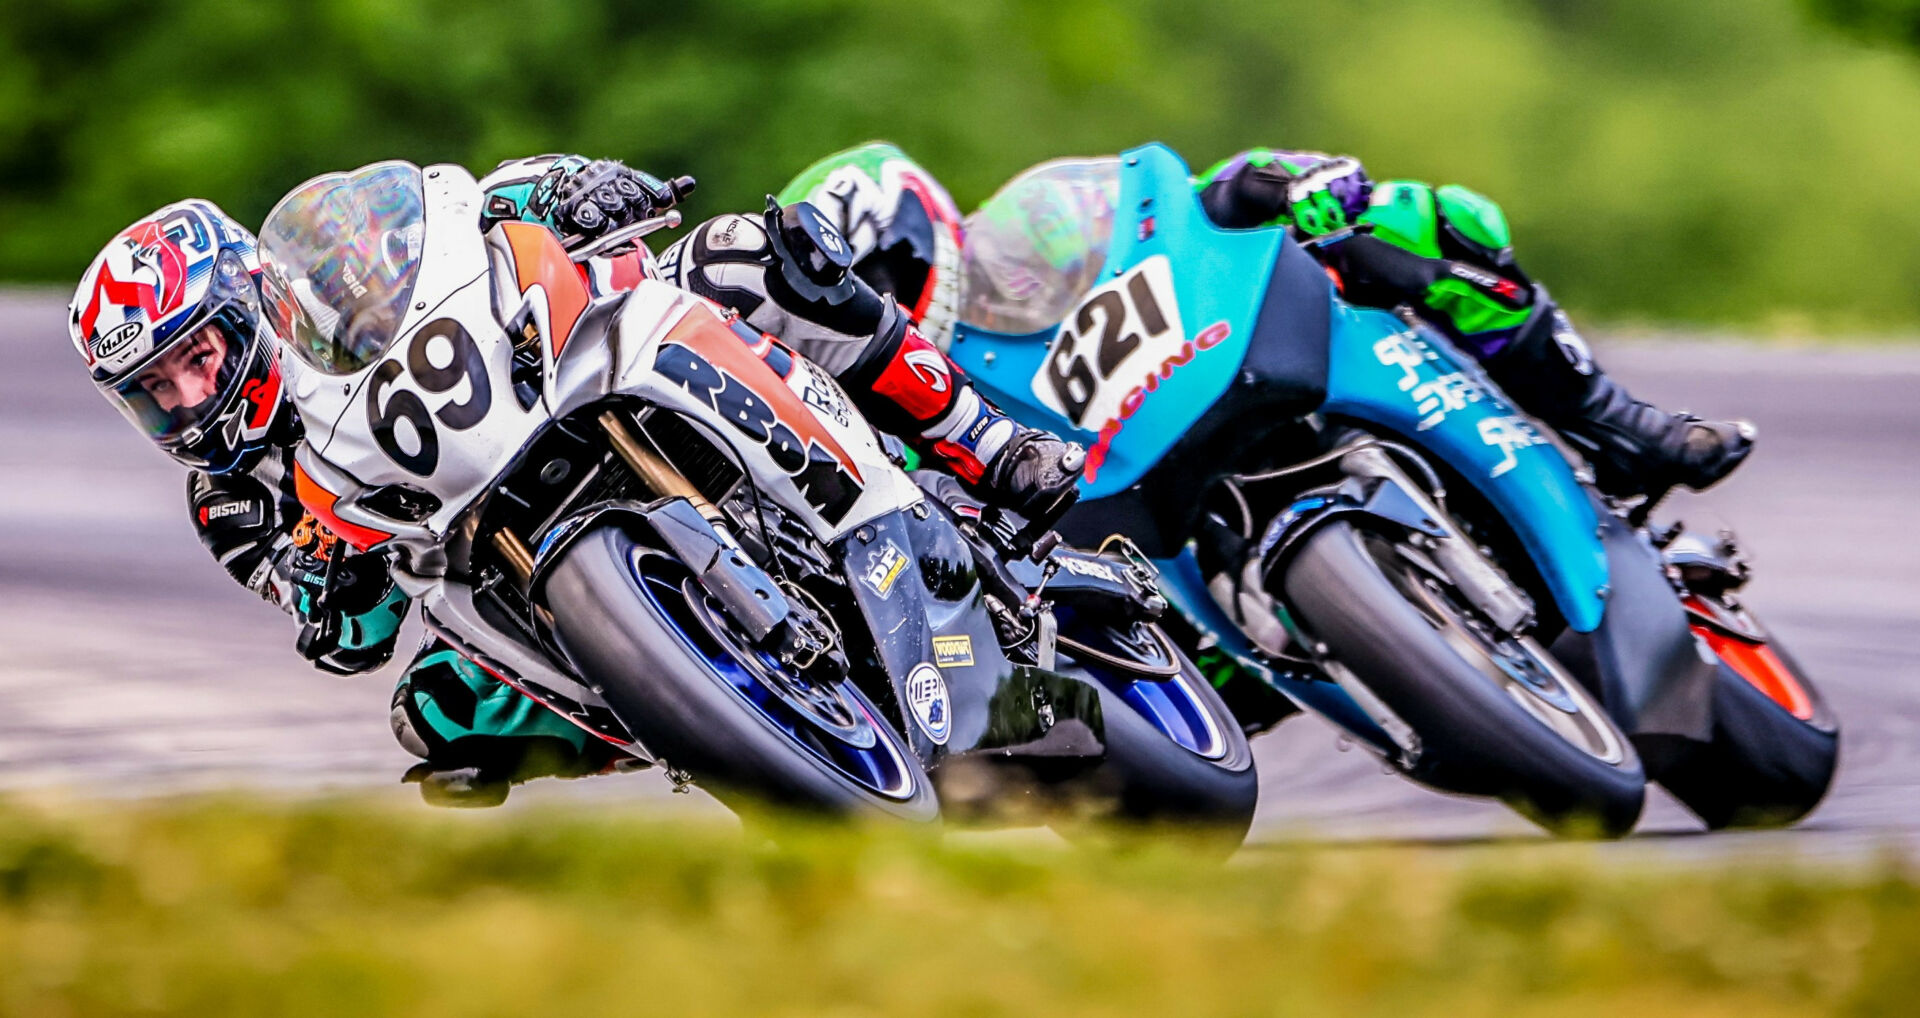 Ryan Wolfe (69) and Giacomo Manera (621) testing at VIR in preparation for the 2023 N2/WERA National Endurance Series. Photo by Apex Pro Photo, courtesy RBoM Racing.